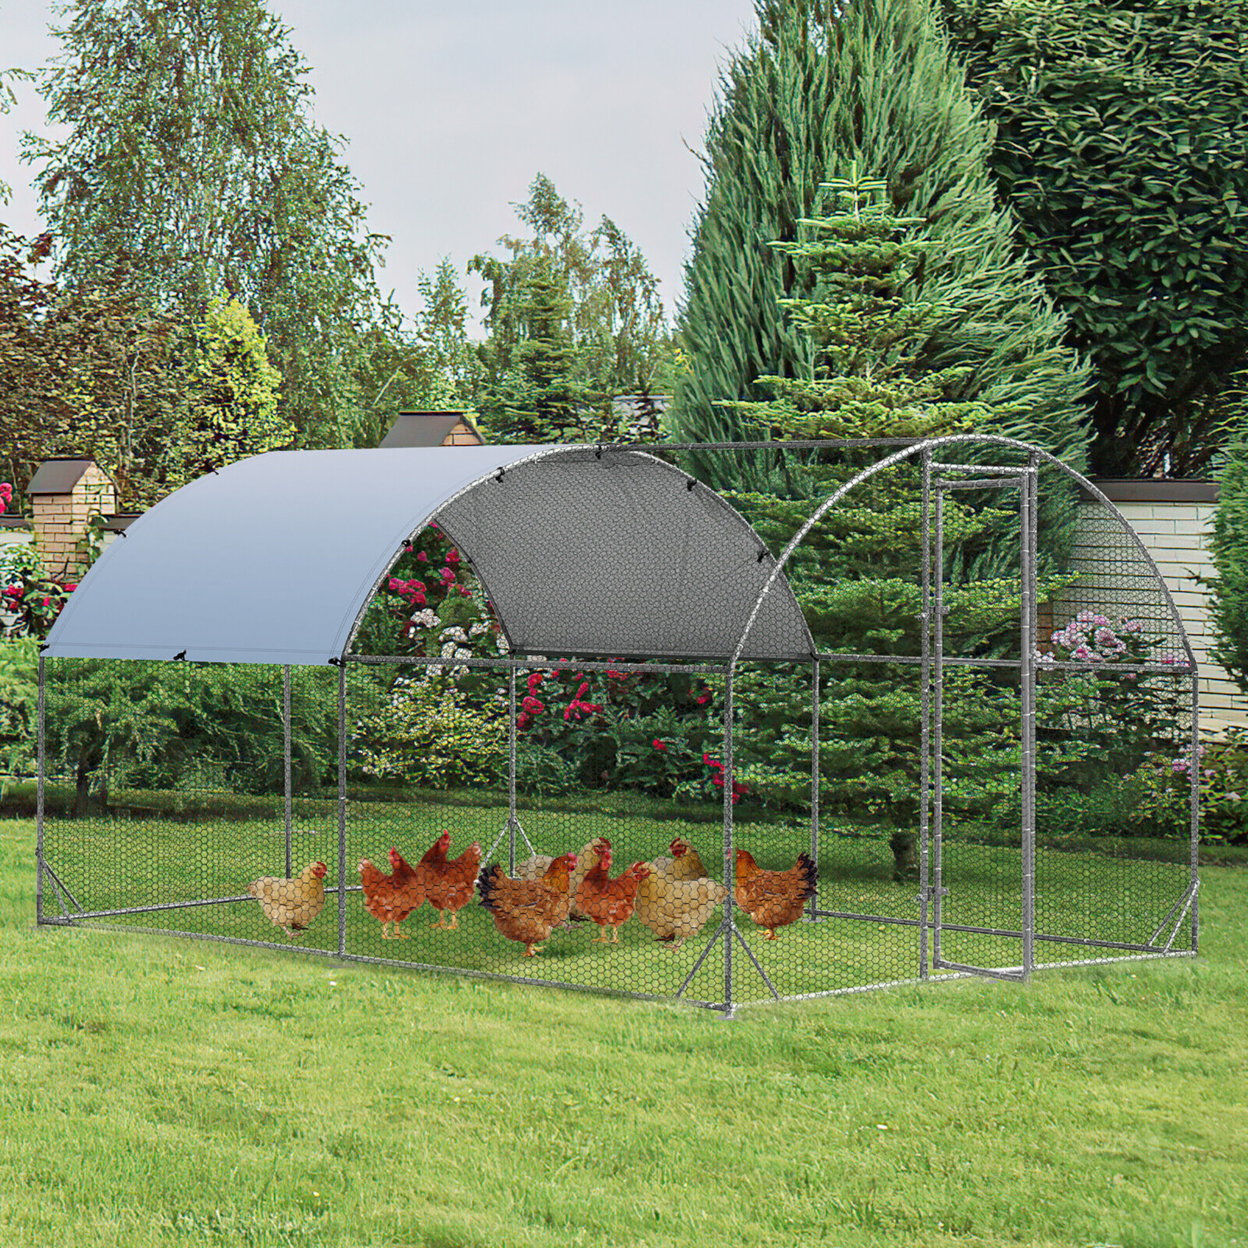 Large Metal Chicken Coop Outdoor Galvanized Dome Cage W/ Cover 9 Ft X 12.5 Ft